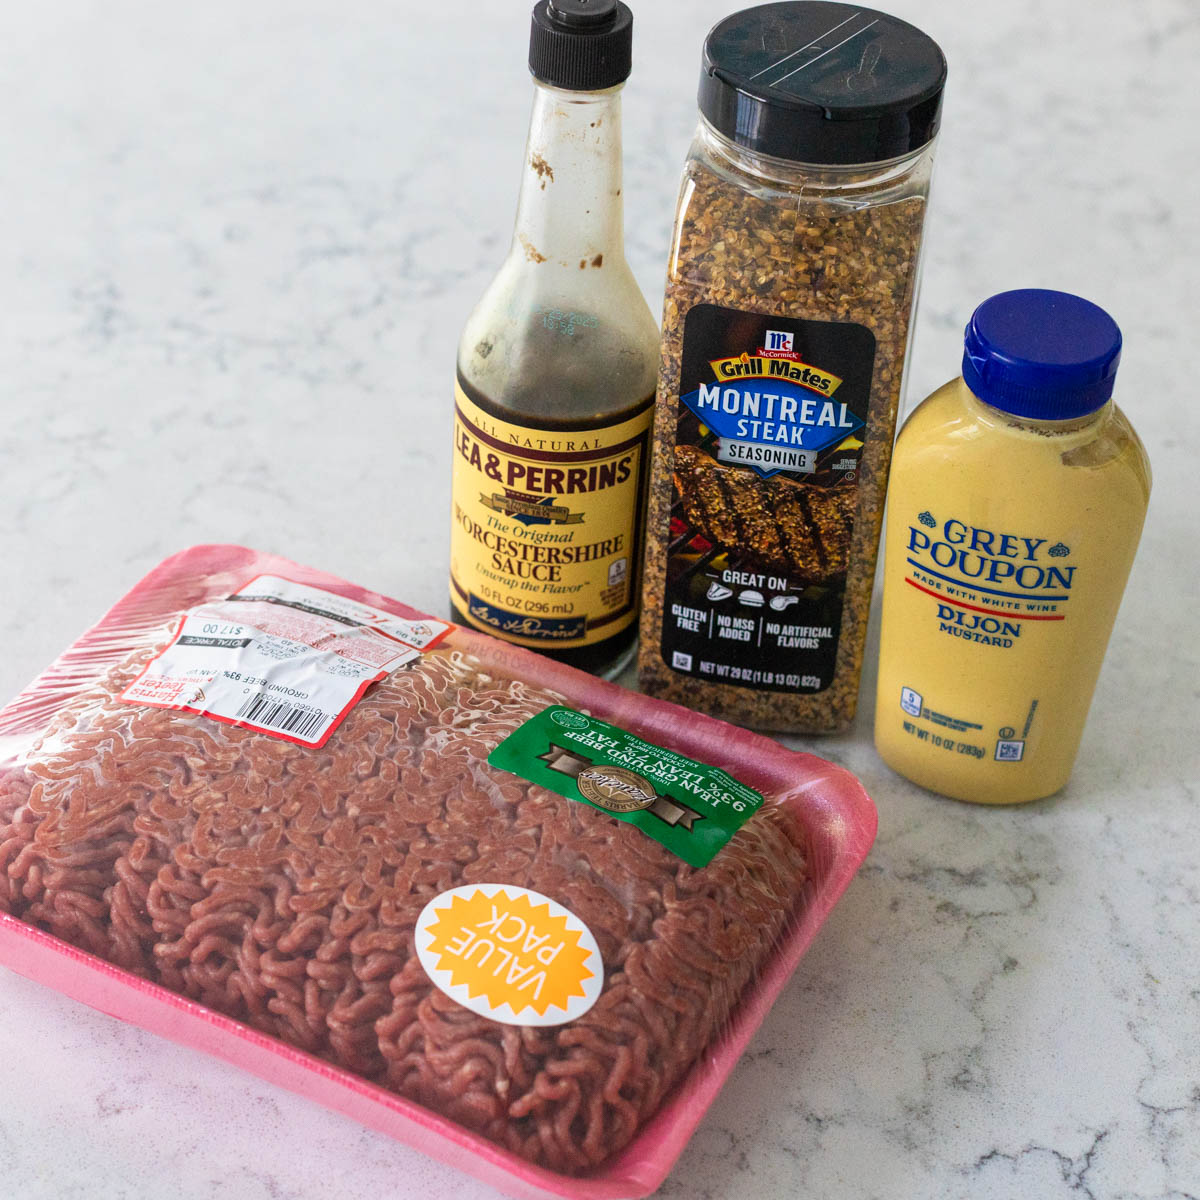 The ingredients to make a classic hamburger are on the counter.